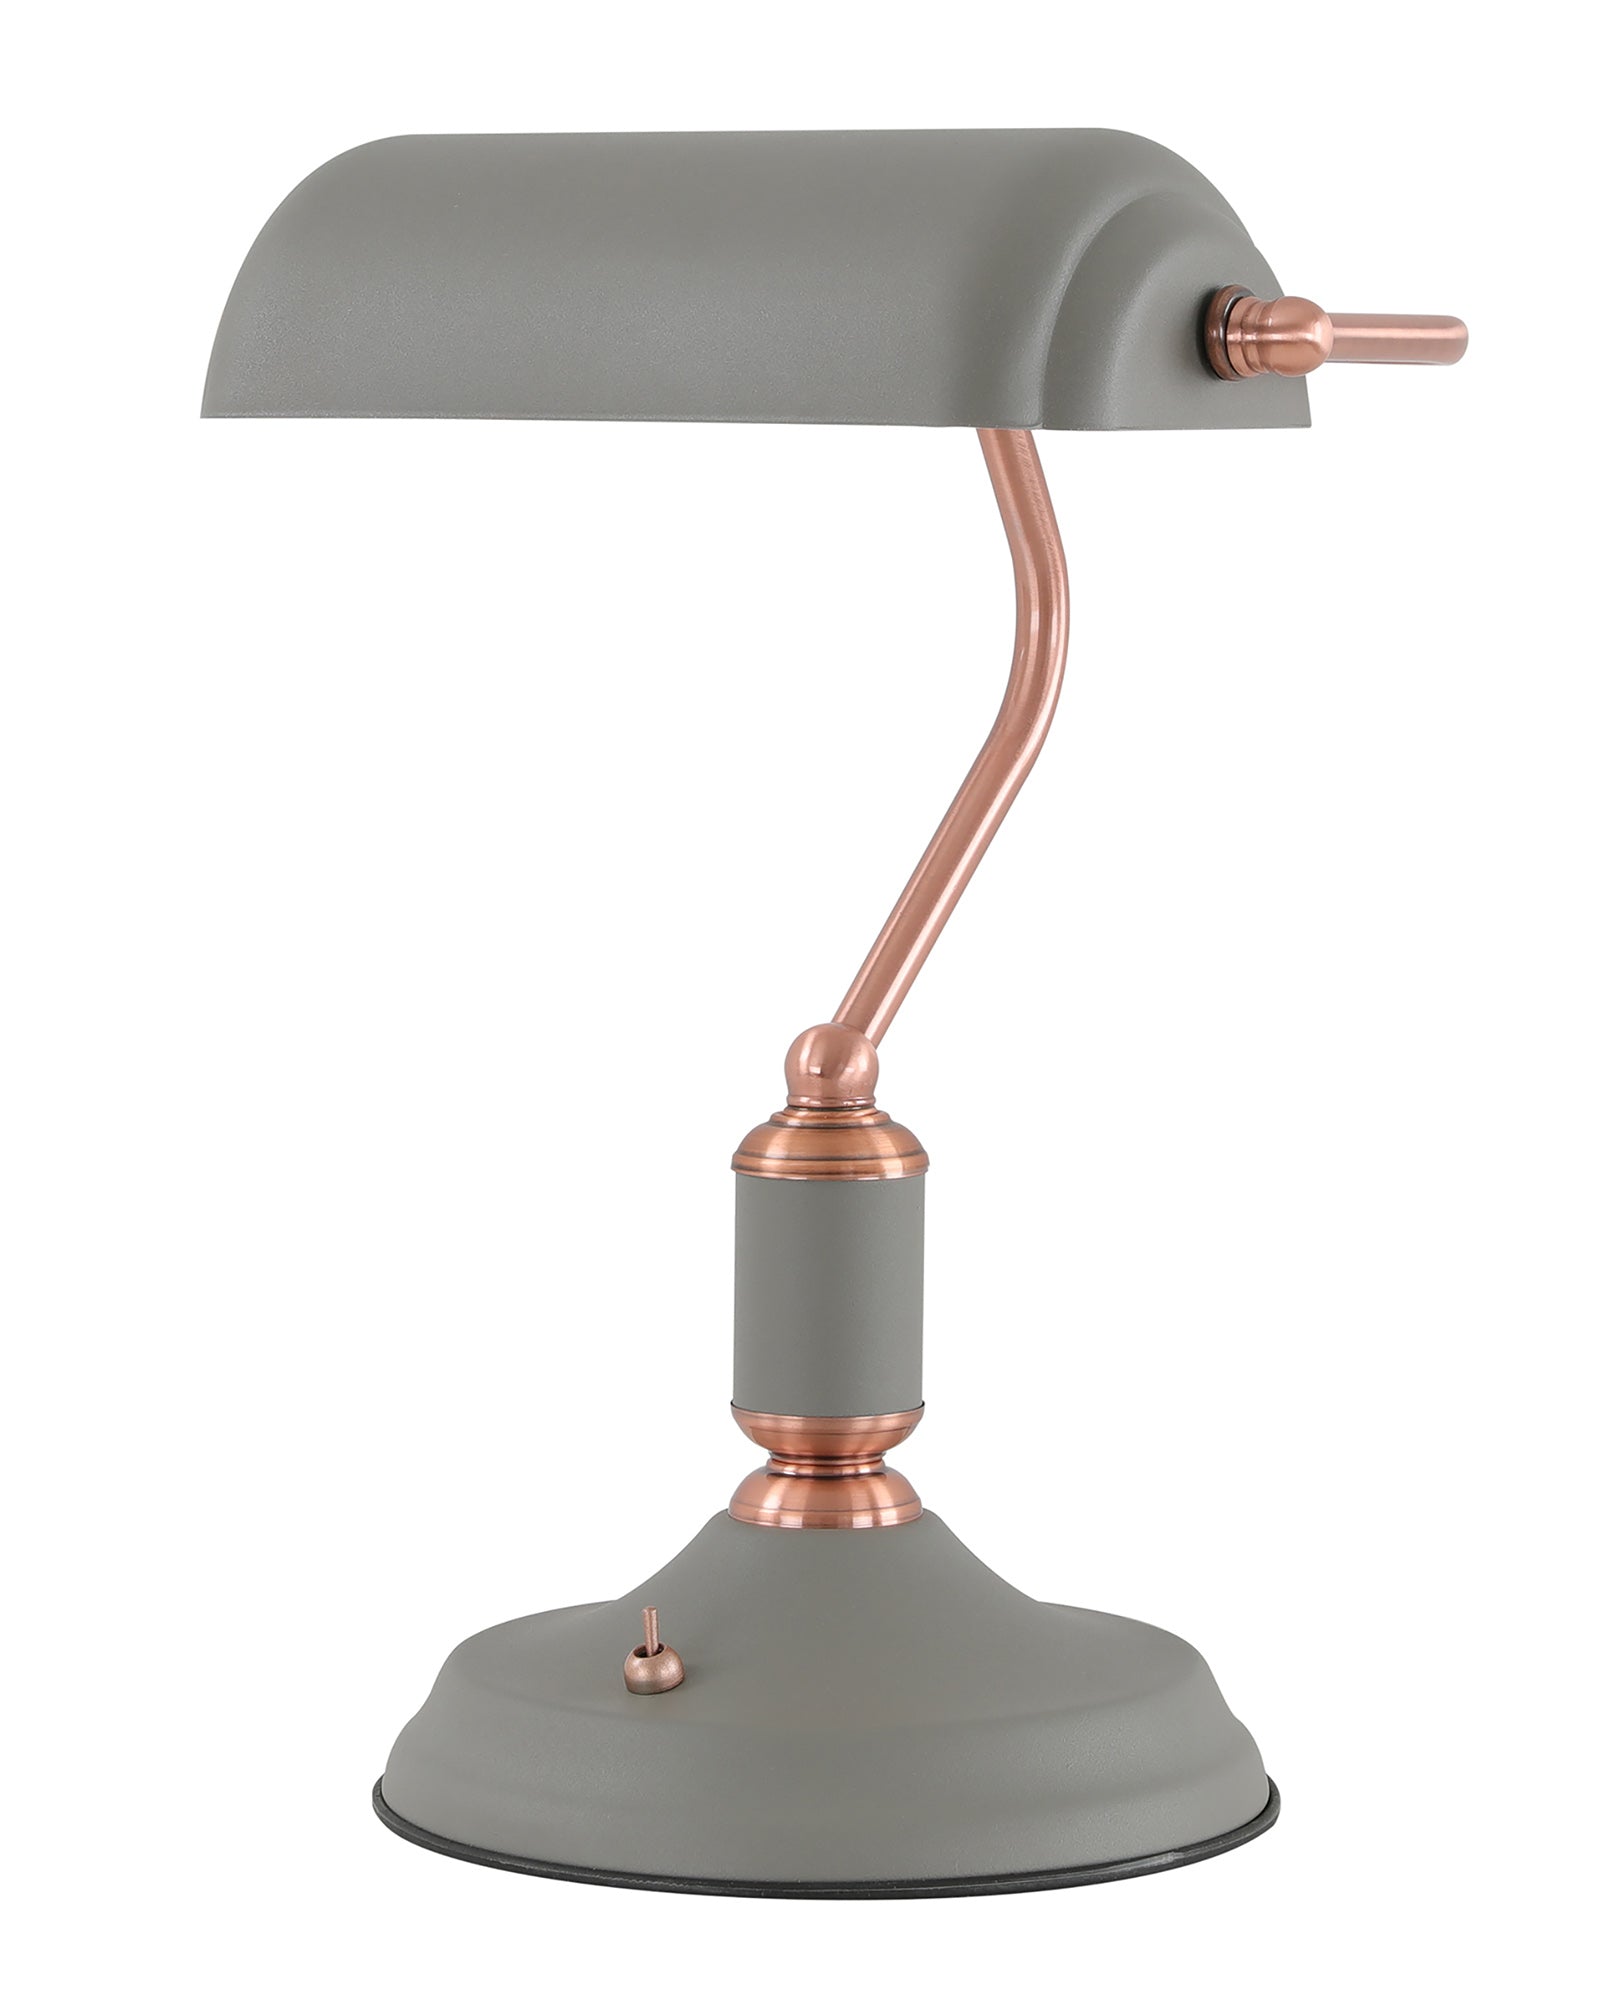 Banker Table Lamp 1 Light With Toggle Switch, Sand Grey/Copper